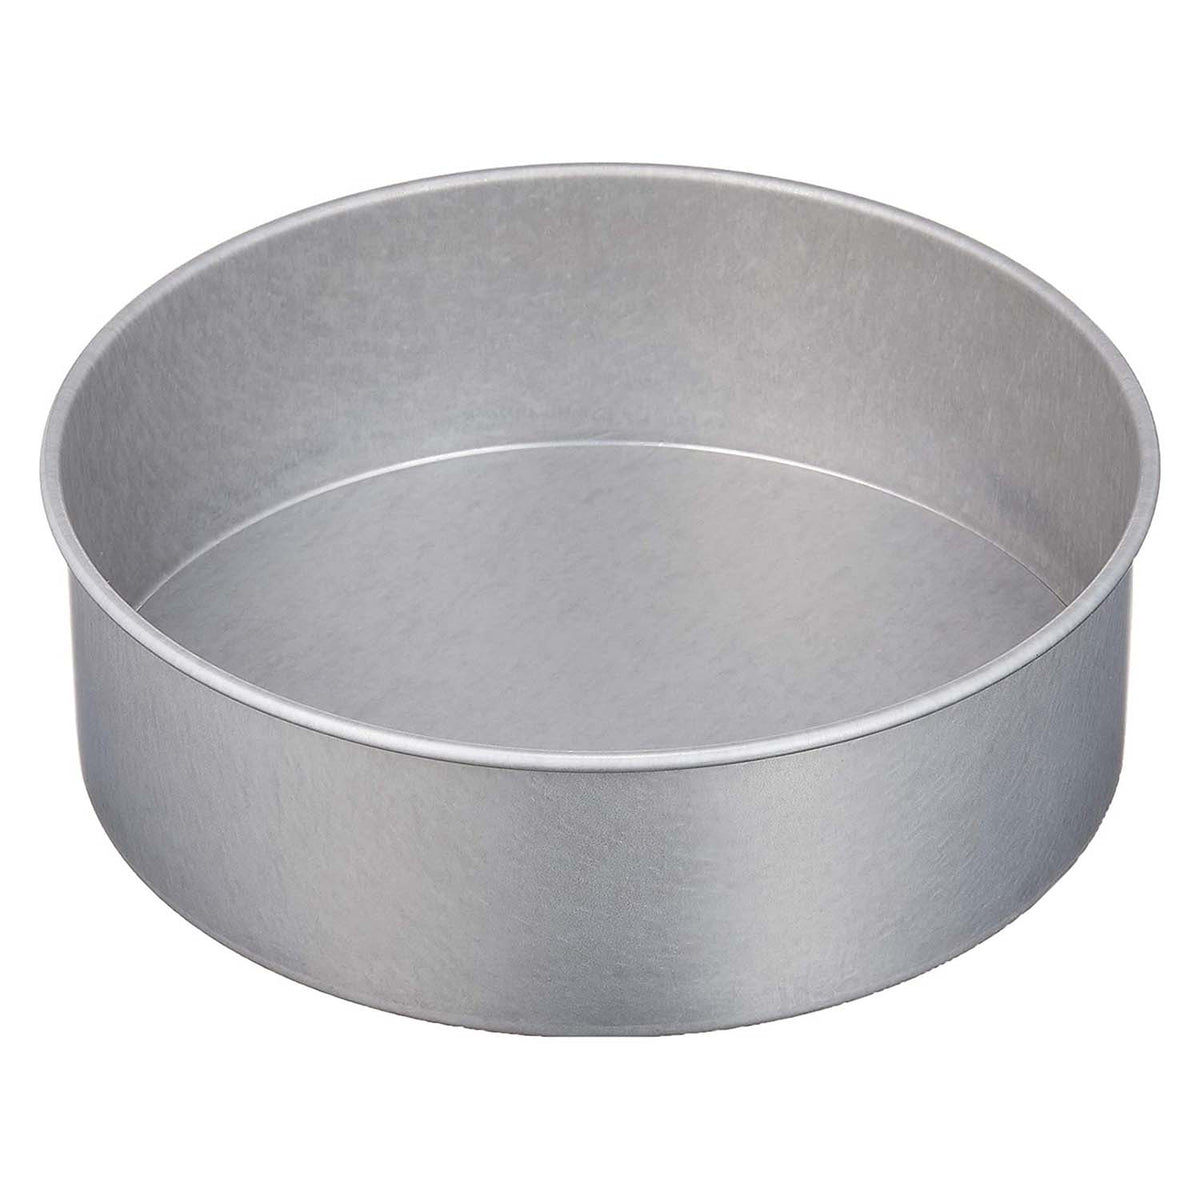 TIGERCROWN Steel Round Cake Pan with Removable Bottom